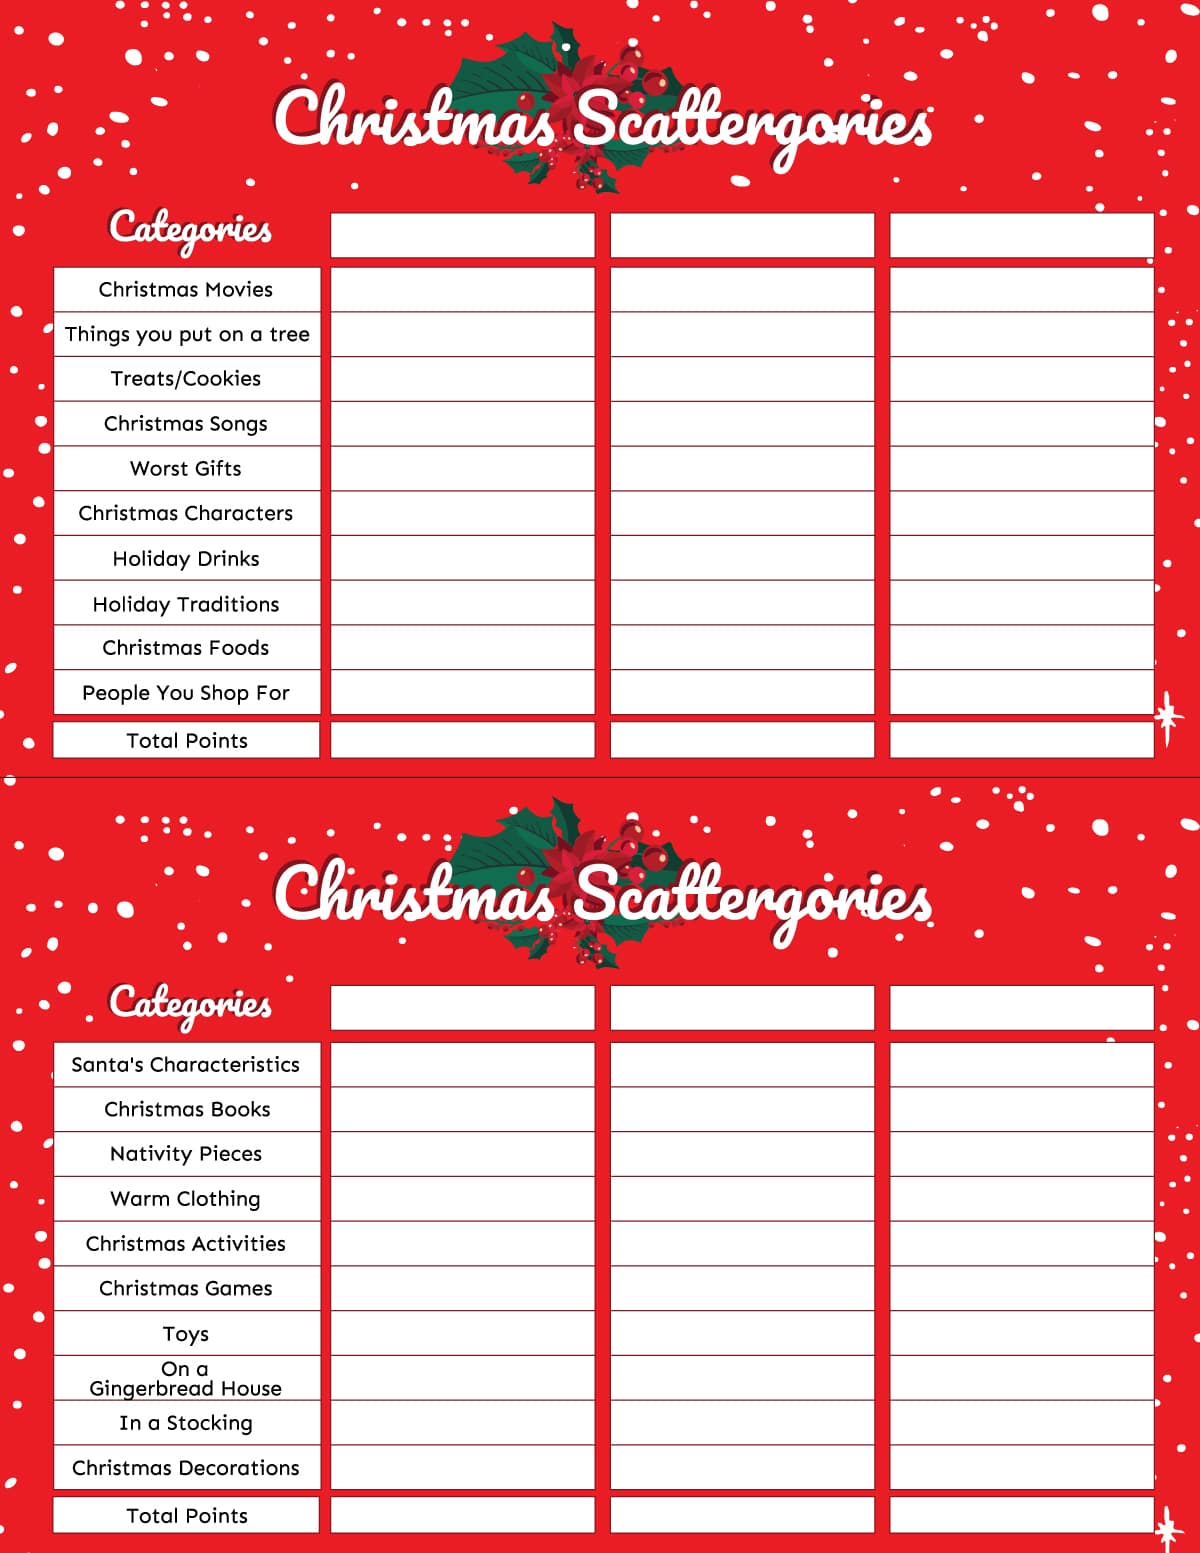 Christmas Scattergories cards